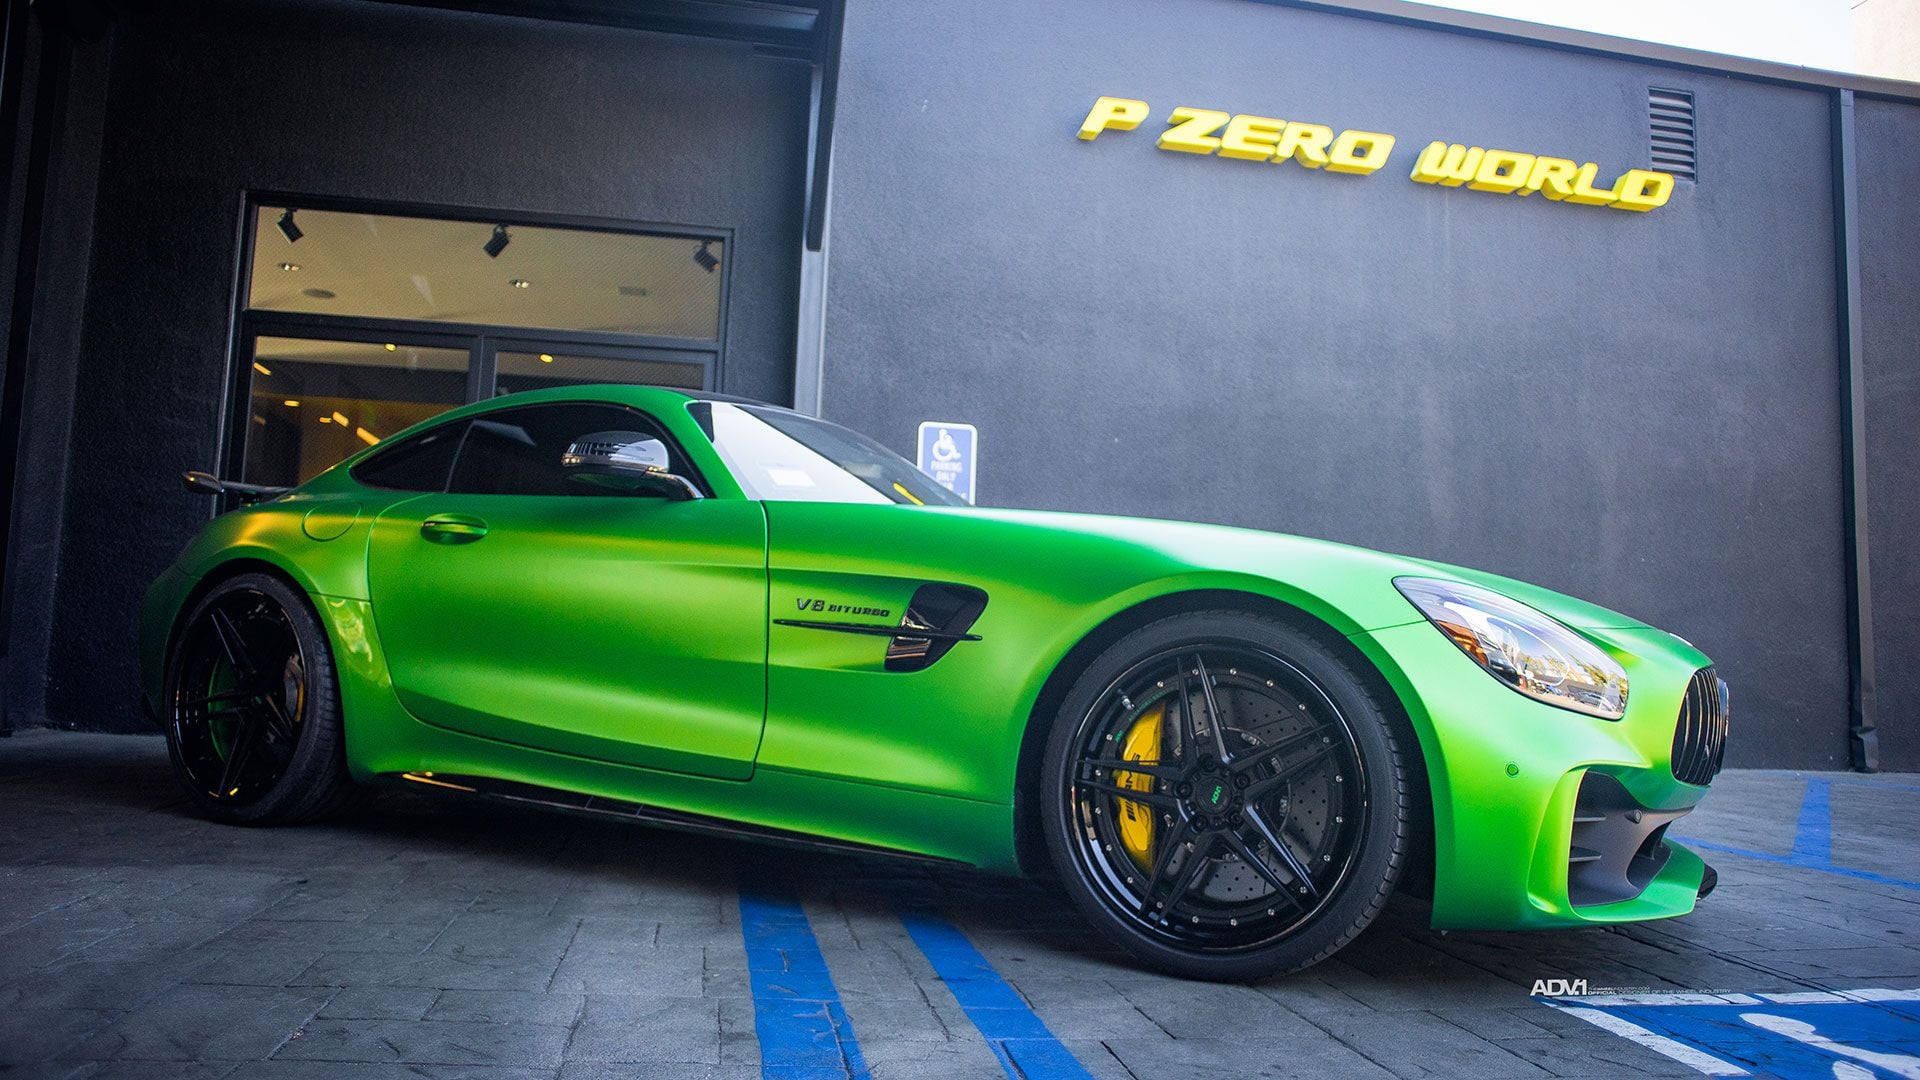 2018 Mercedes-Benz AMG GT R - 2018 AMG GT-R Ultimate Beast frm Green Hell w/custom ADV.1 Wheels, 20 extra HP,& more - Used - VIN WDDYJ7KA3JA013180 - 2,100 Miles - Coupe - Other - Los Angees, CA 90048, United States